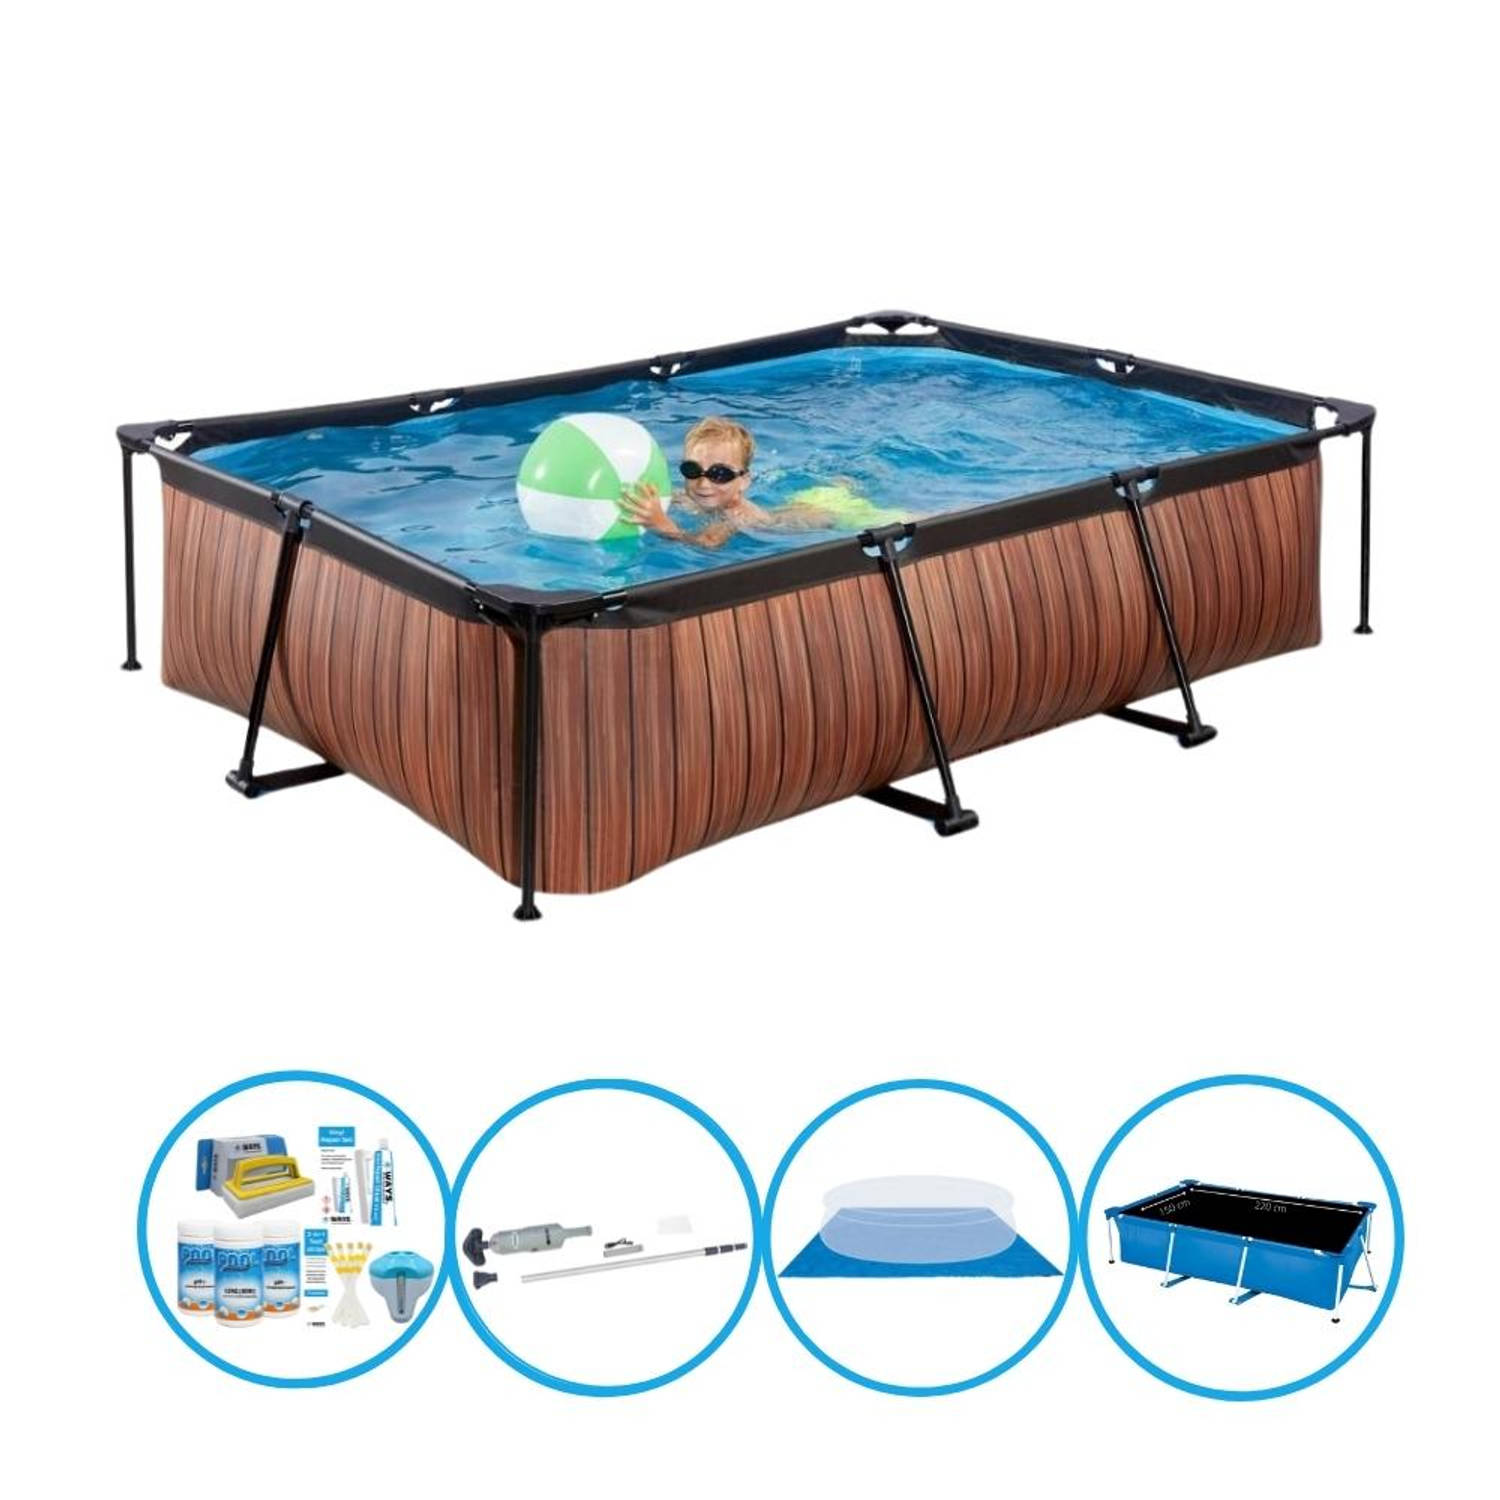 EXIT Zwembad Timber Style - Frame Pool 300x200x65 cm - Plus bijbehorende accessoires